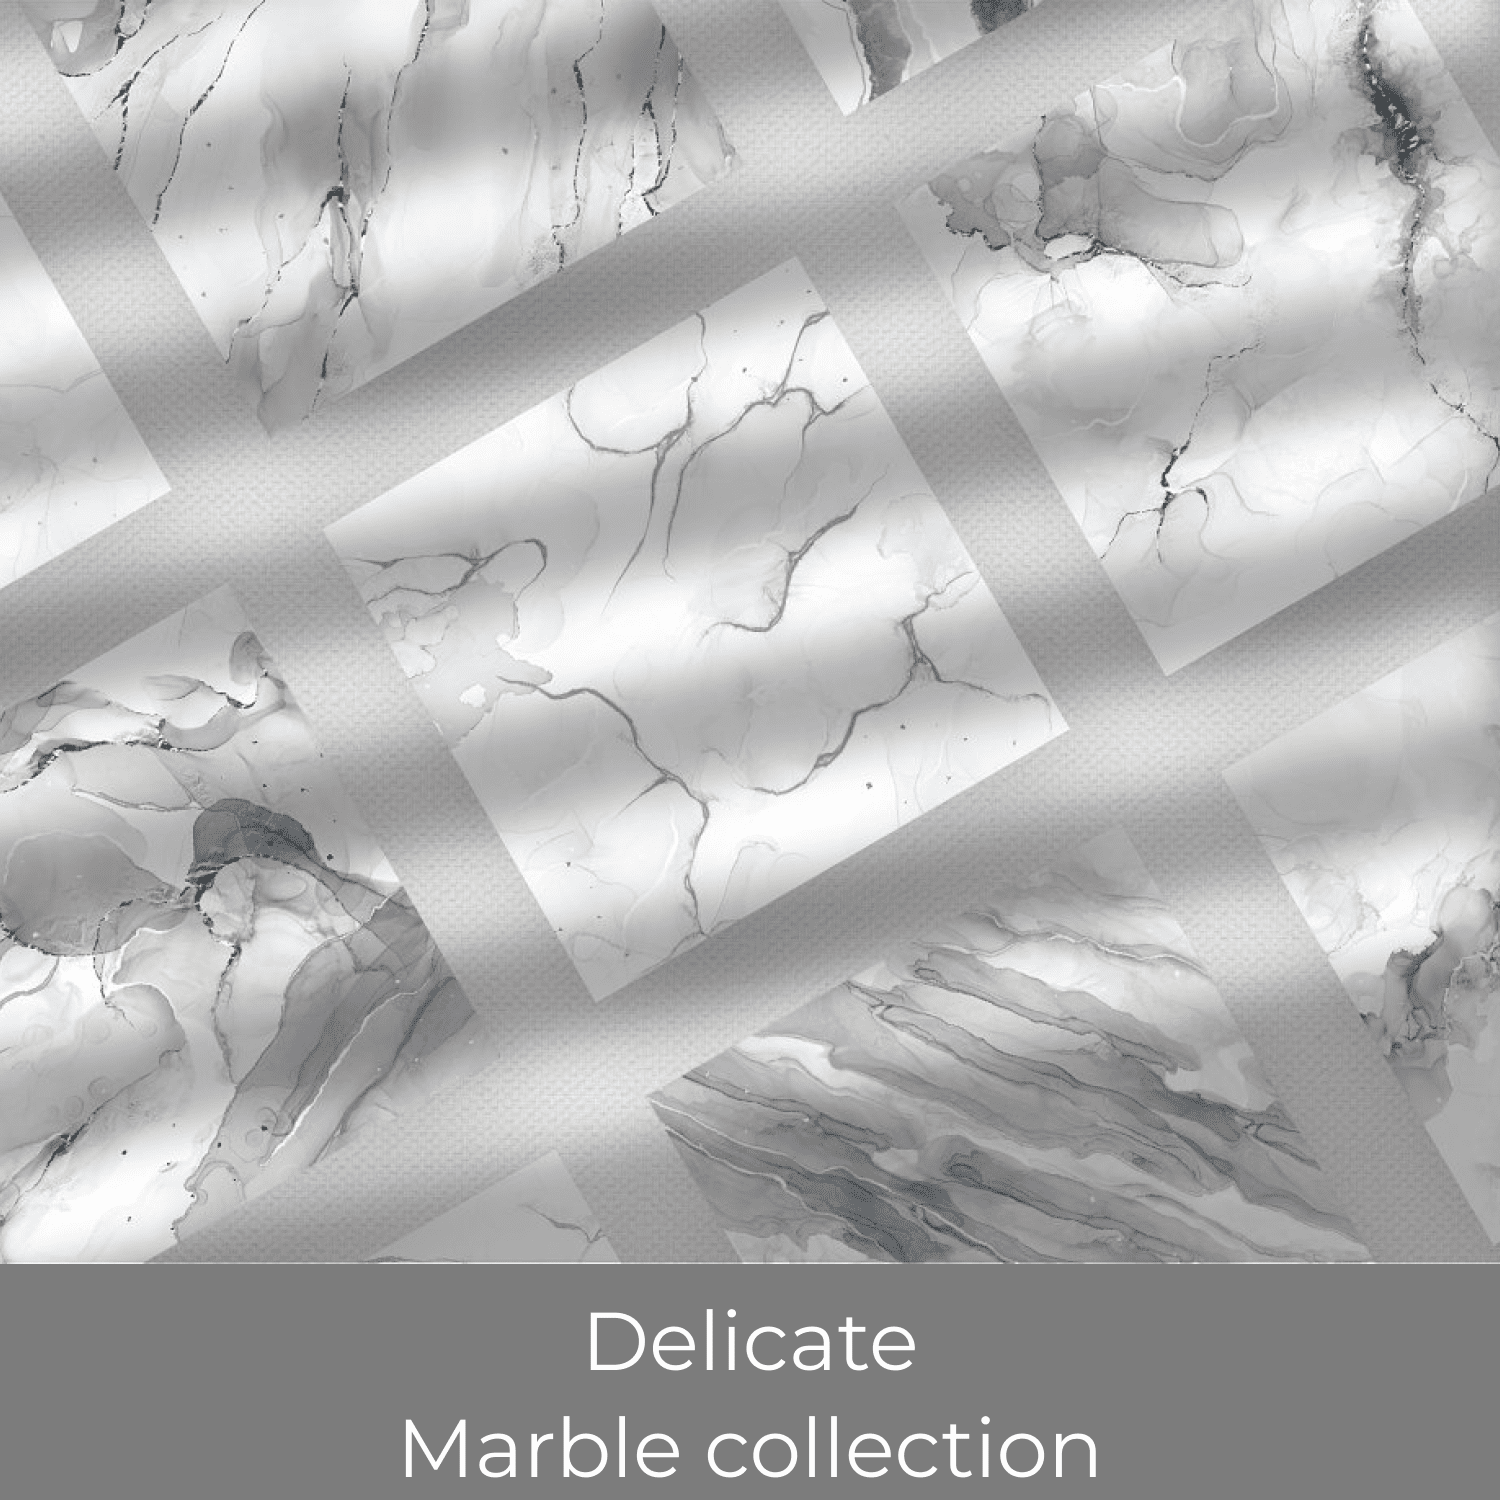 Delicate Marble Collection cover.